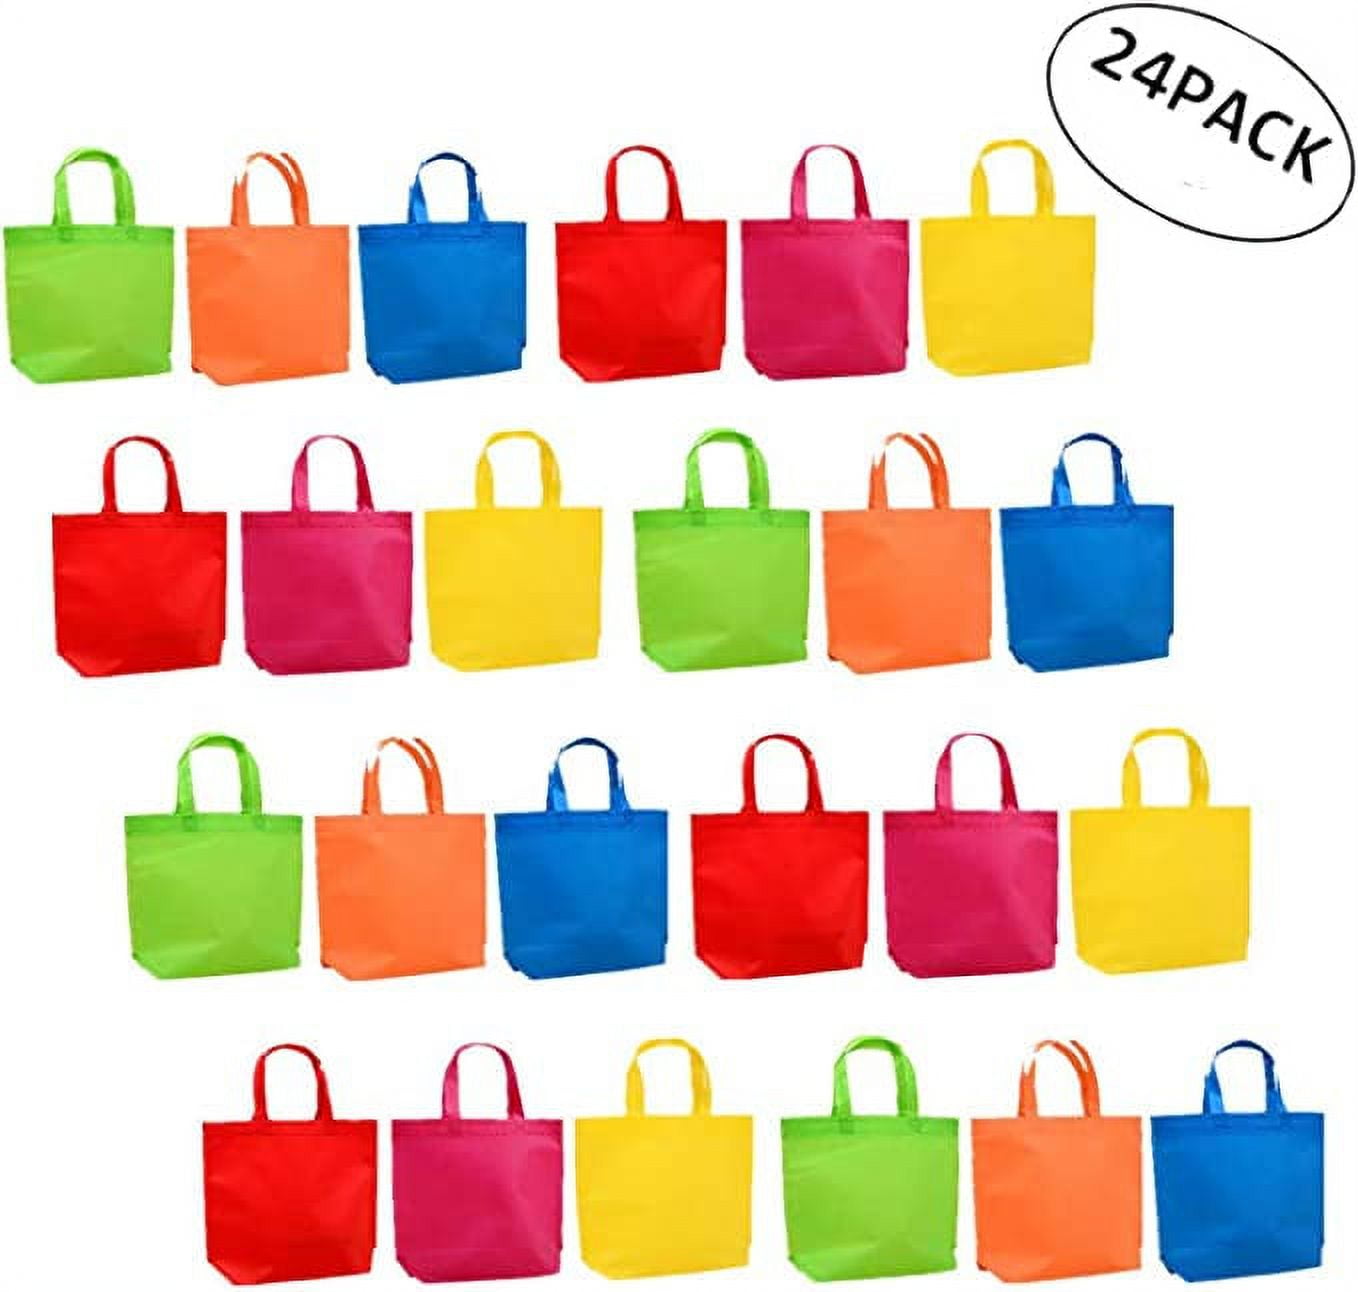  WERNNSAI Reptile Party Favor Bags - 16 PCS Reptile Birthday  Party Supplies Gift Bags with Handles for Kids Boys Leopard Gecko Turtle  Snakes Goodie Bags for Reptile Theme Camping Party Decorations 